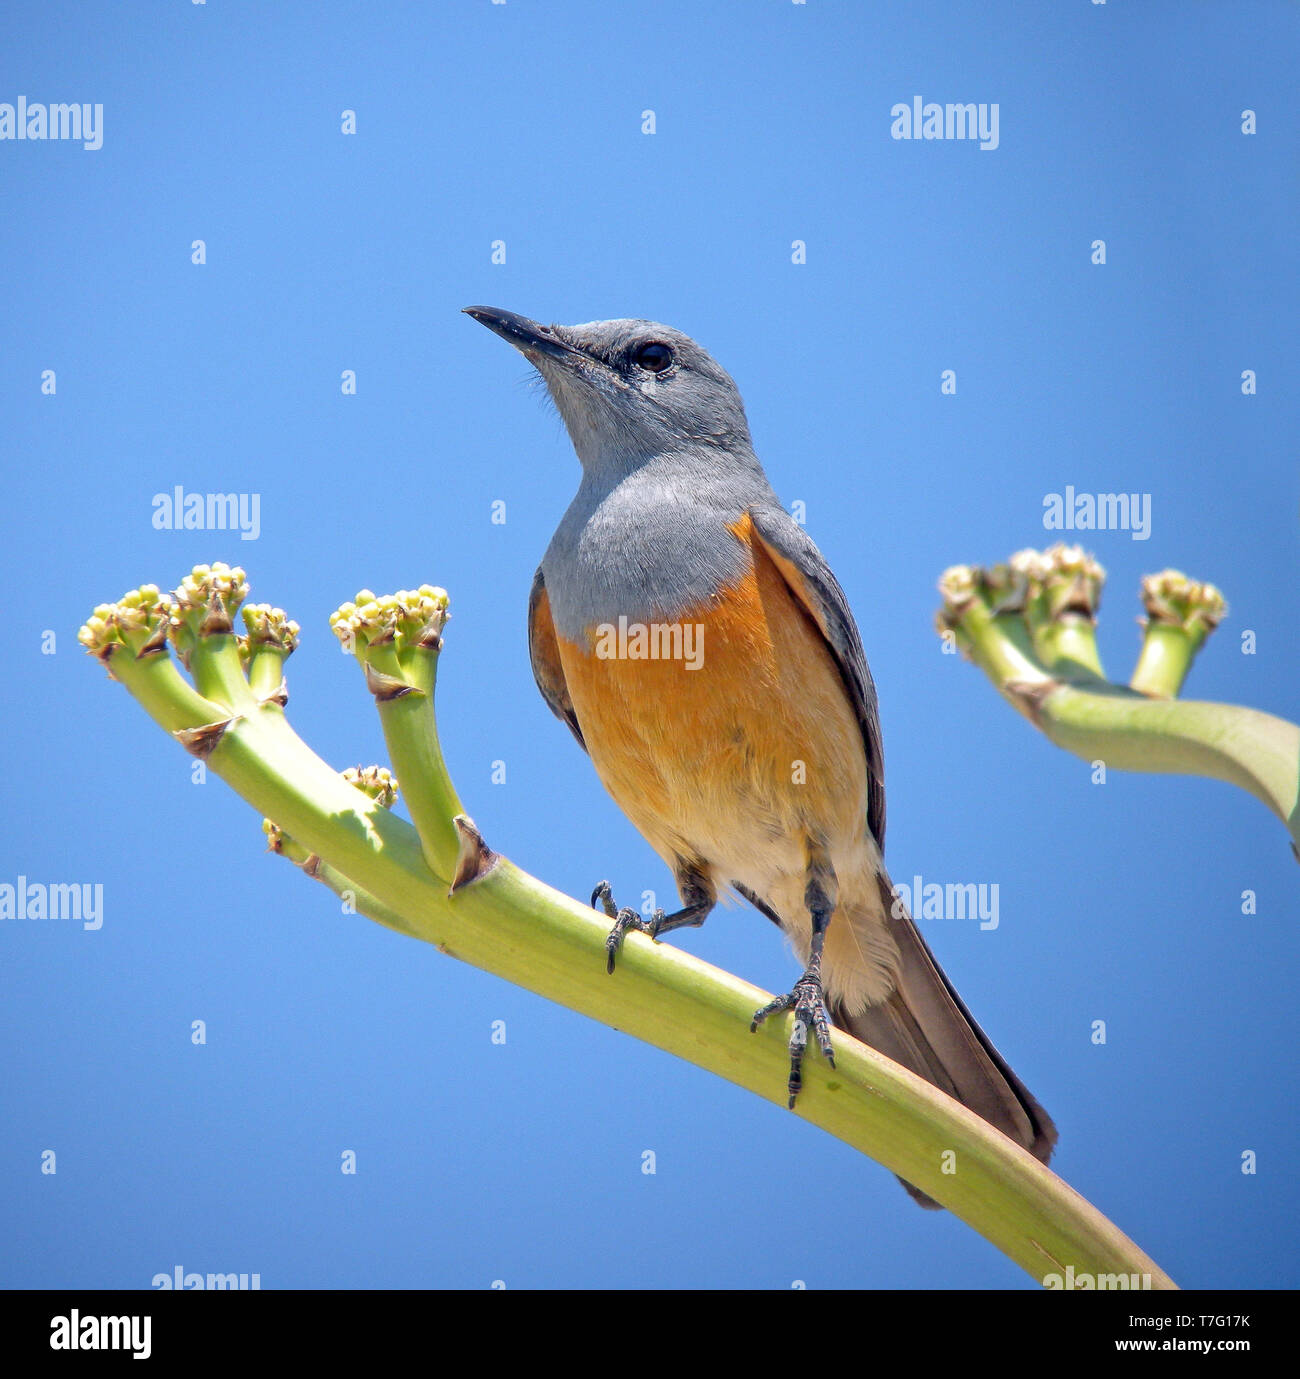 Adult male Littoral Rock Thrush (Monticola imerina) perched on a twig in Madagascar. Stock Photo